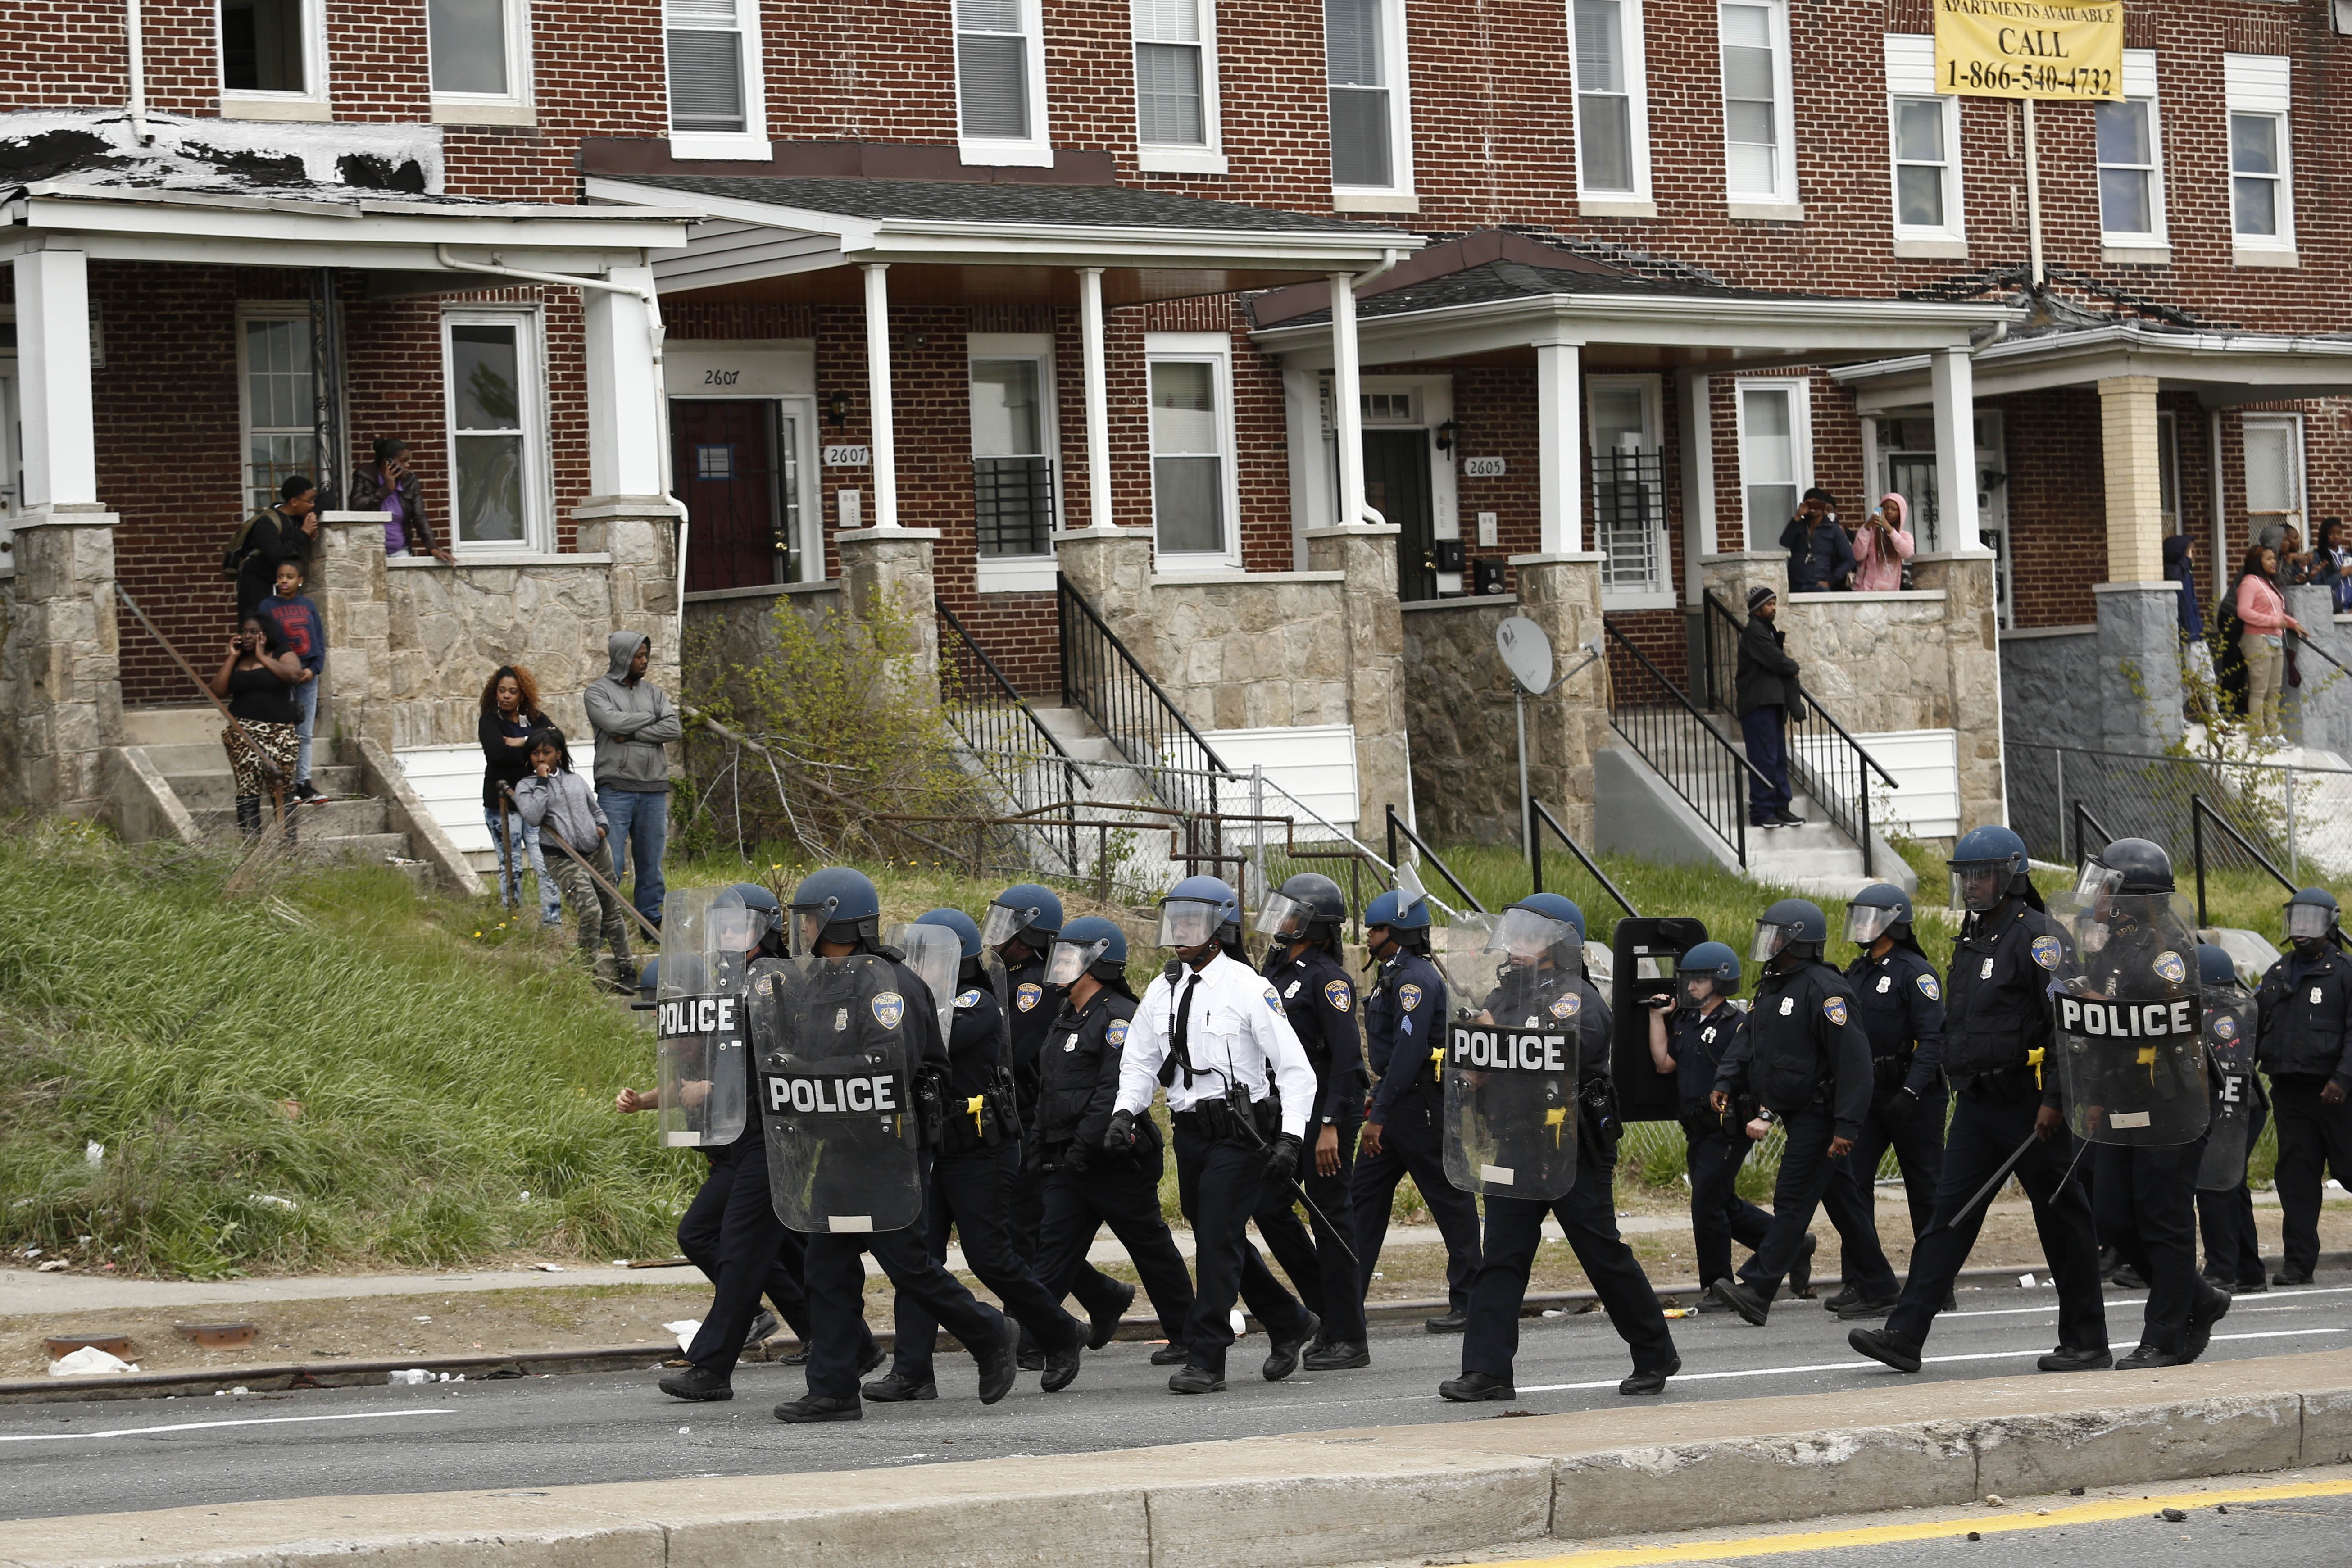 Police officers walk in formation on Reisterstown Road near Mondawmin Mall in Baltimore on April 27, 2015 .